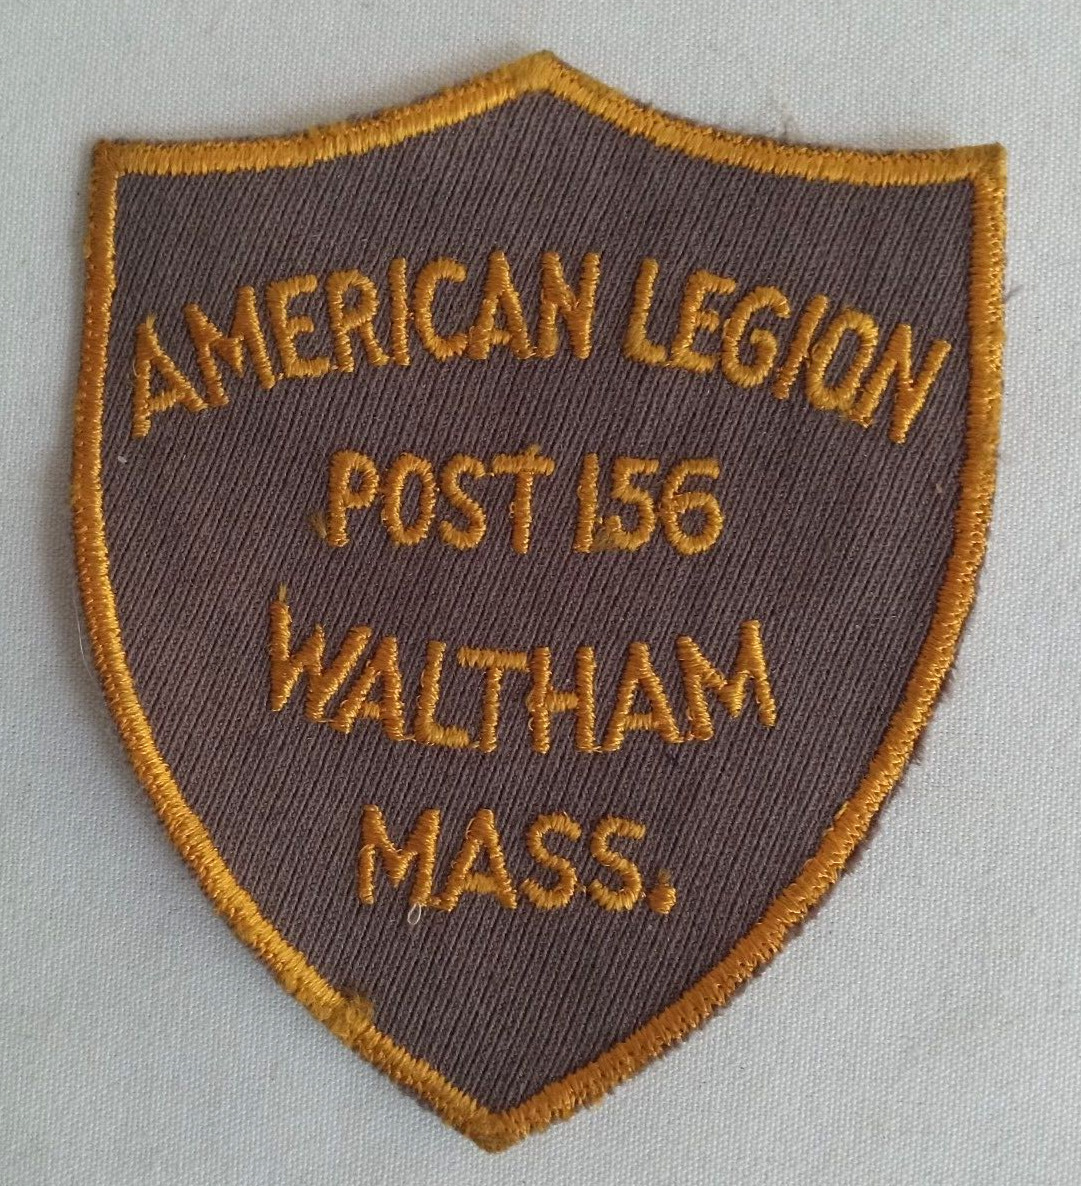 Vintage AMERICAN LEGION, Post 156 Patch-Waltham Mass./ Collectible